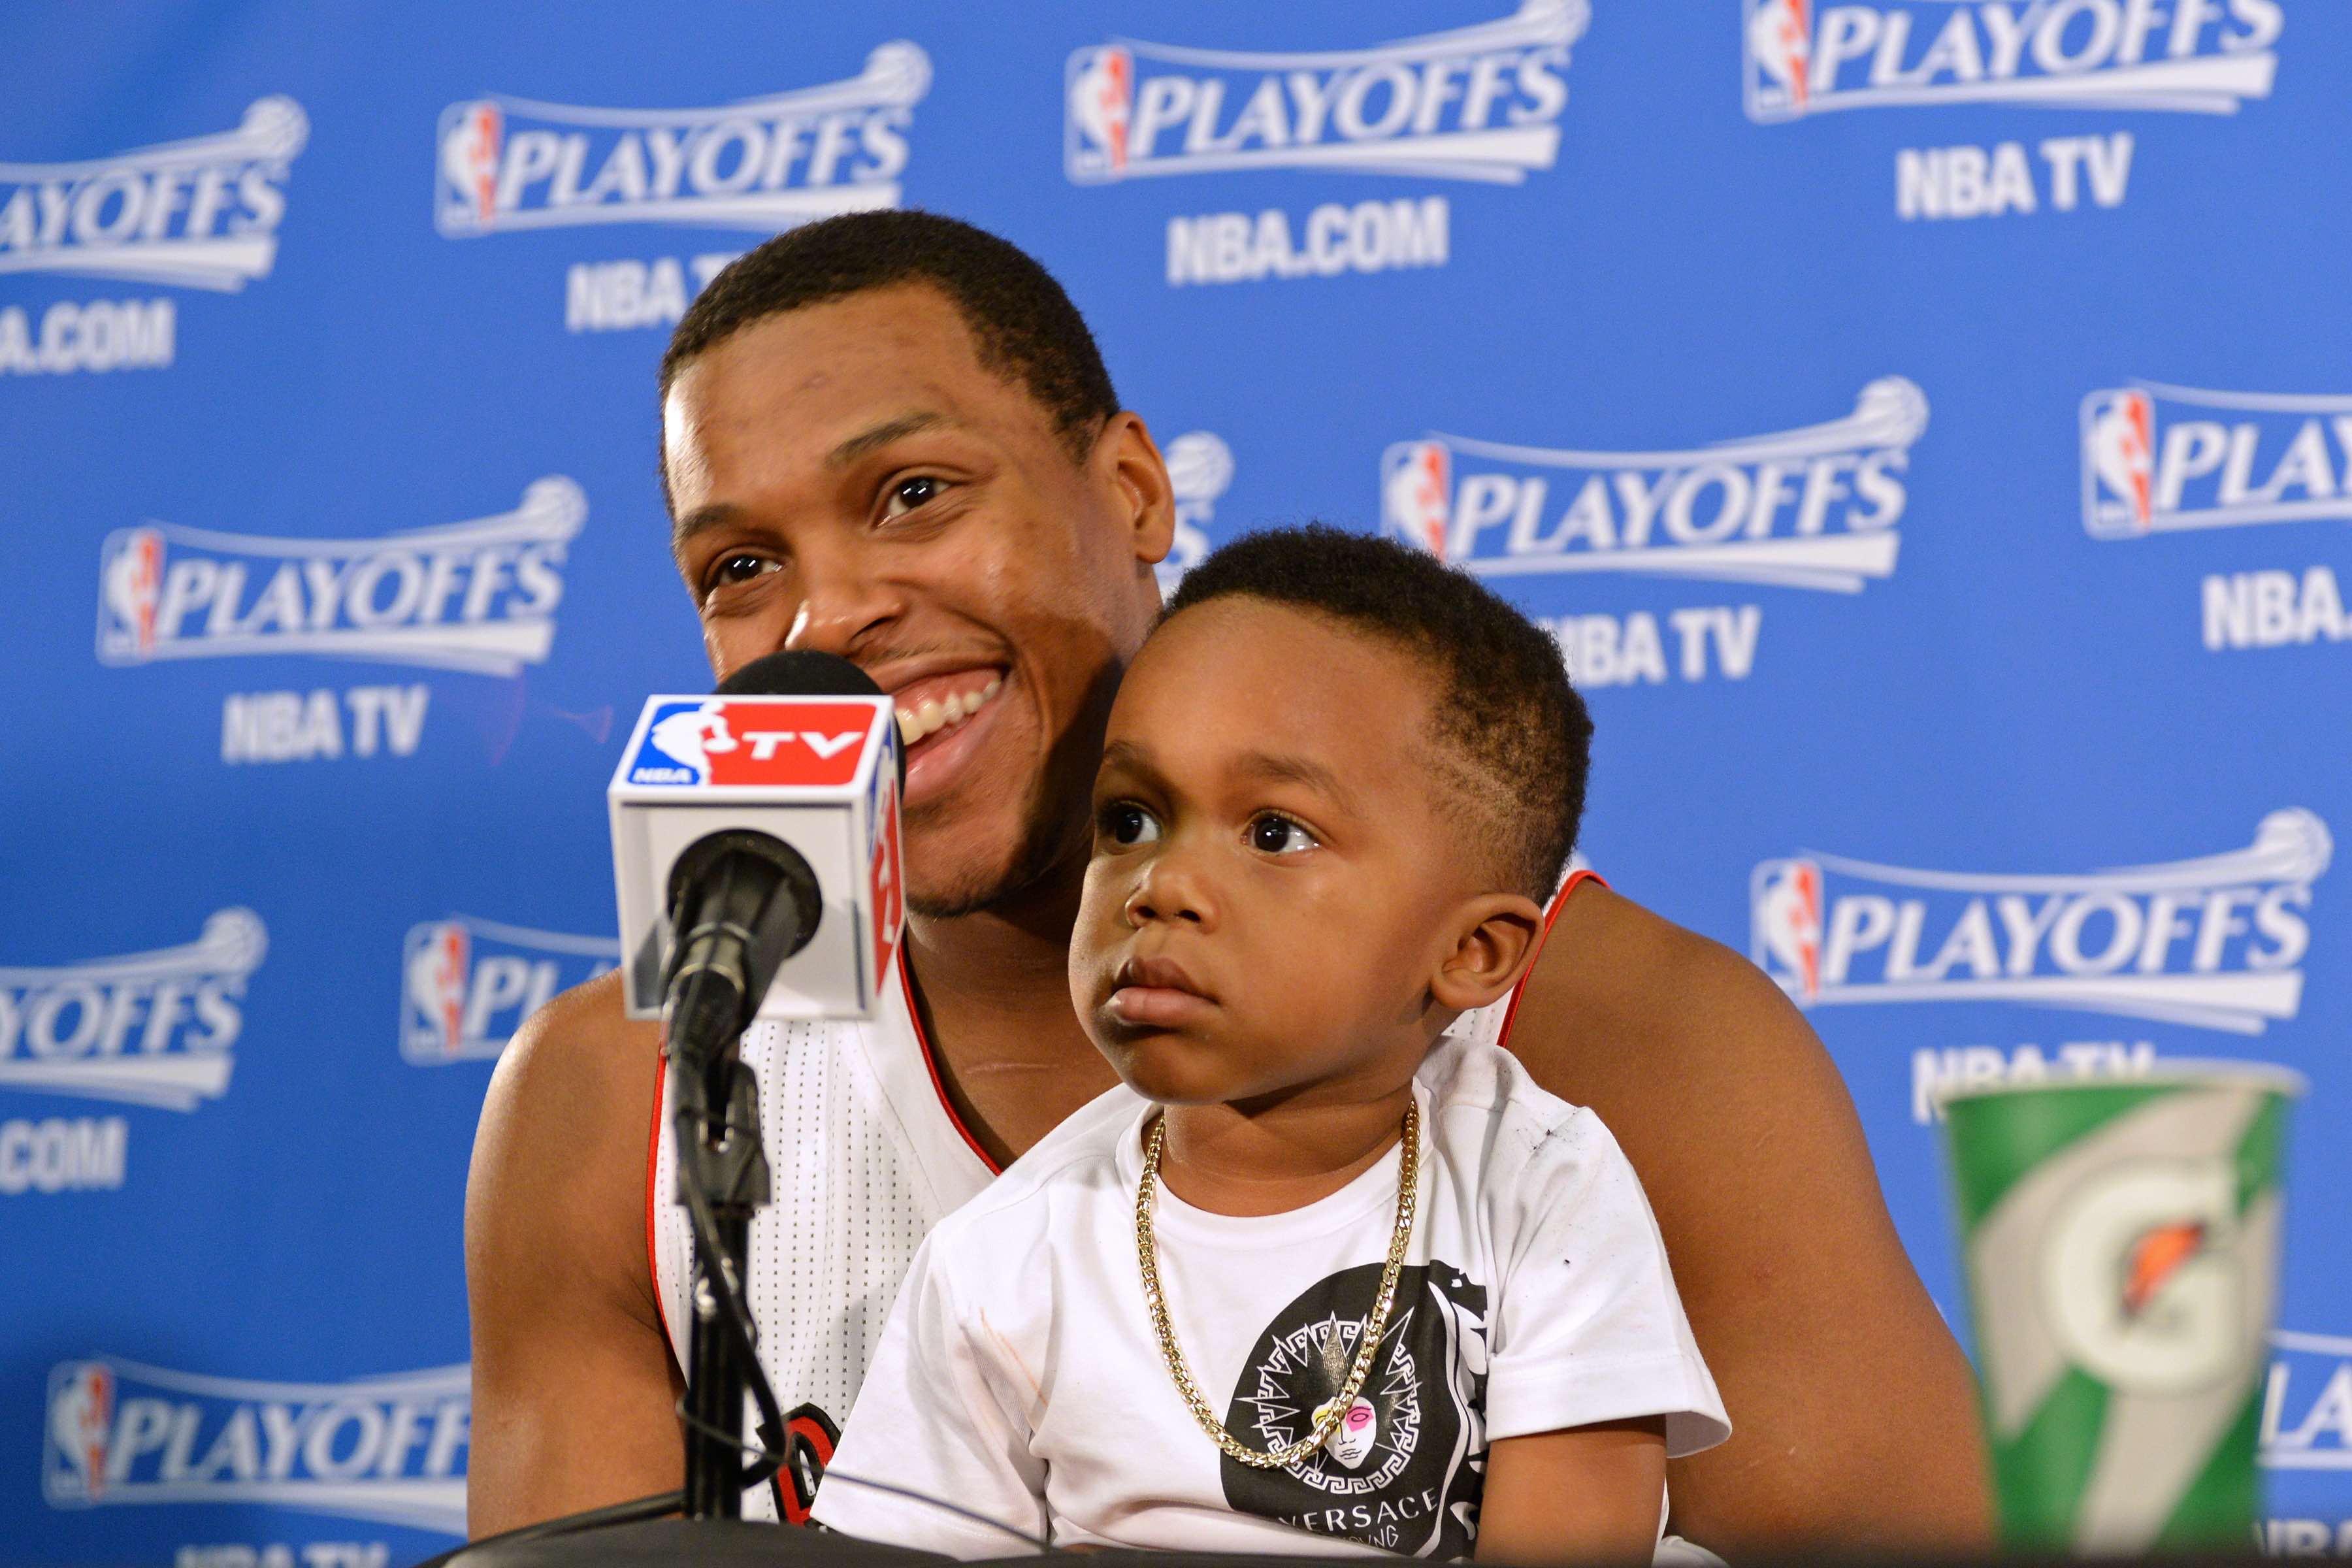 TORONTO, ON - MAY 4: Kyle Lowry #7 of the Toronto Raptors speaks to the media with his son after Game Seven of the Eastern Conference Quarterfinals against the Brooklyn Nets during the NBA Playoffs at the Air Canada Centre on May 4, 2014 in Toronto, Ontario, Canada. NOTE TO USER: User expressly acknowledges and agrees that, by downloading and/or using this photograph, user is consenting to the terms and conditions of the Getty Images License Agreement. Mandatory Copyright Notice: Copyright 2014 NBAE (Photo by Ron Turenne/NBAE via Getty Images)